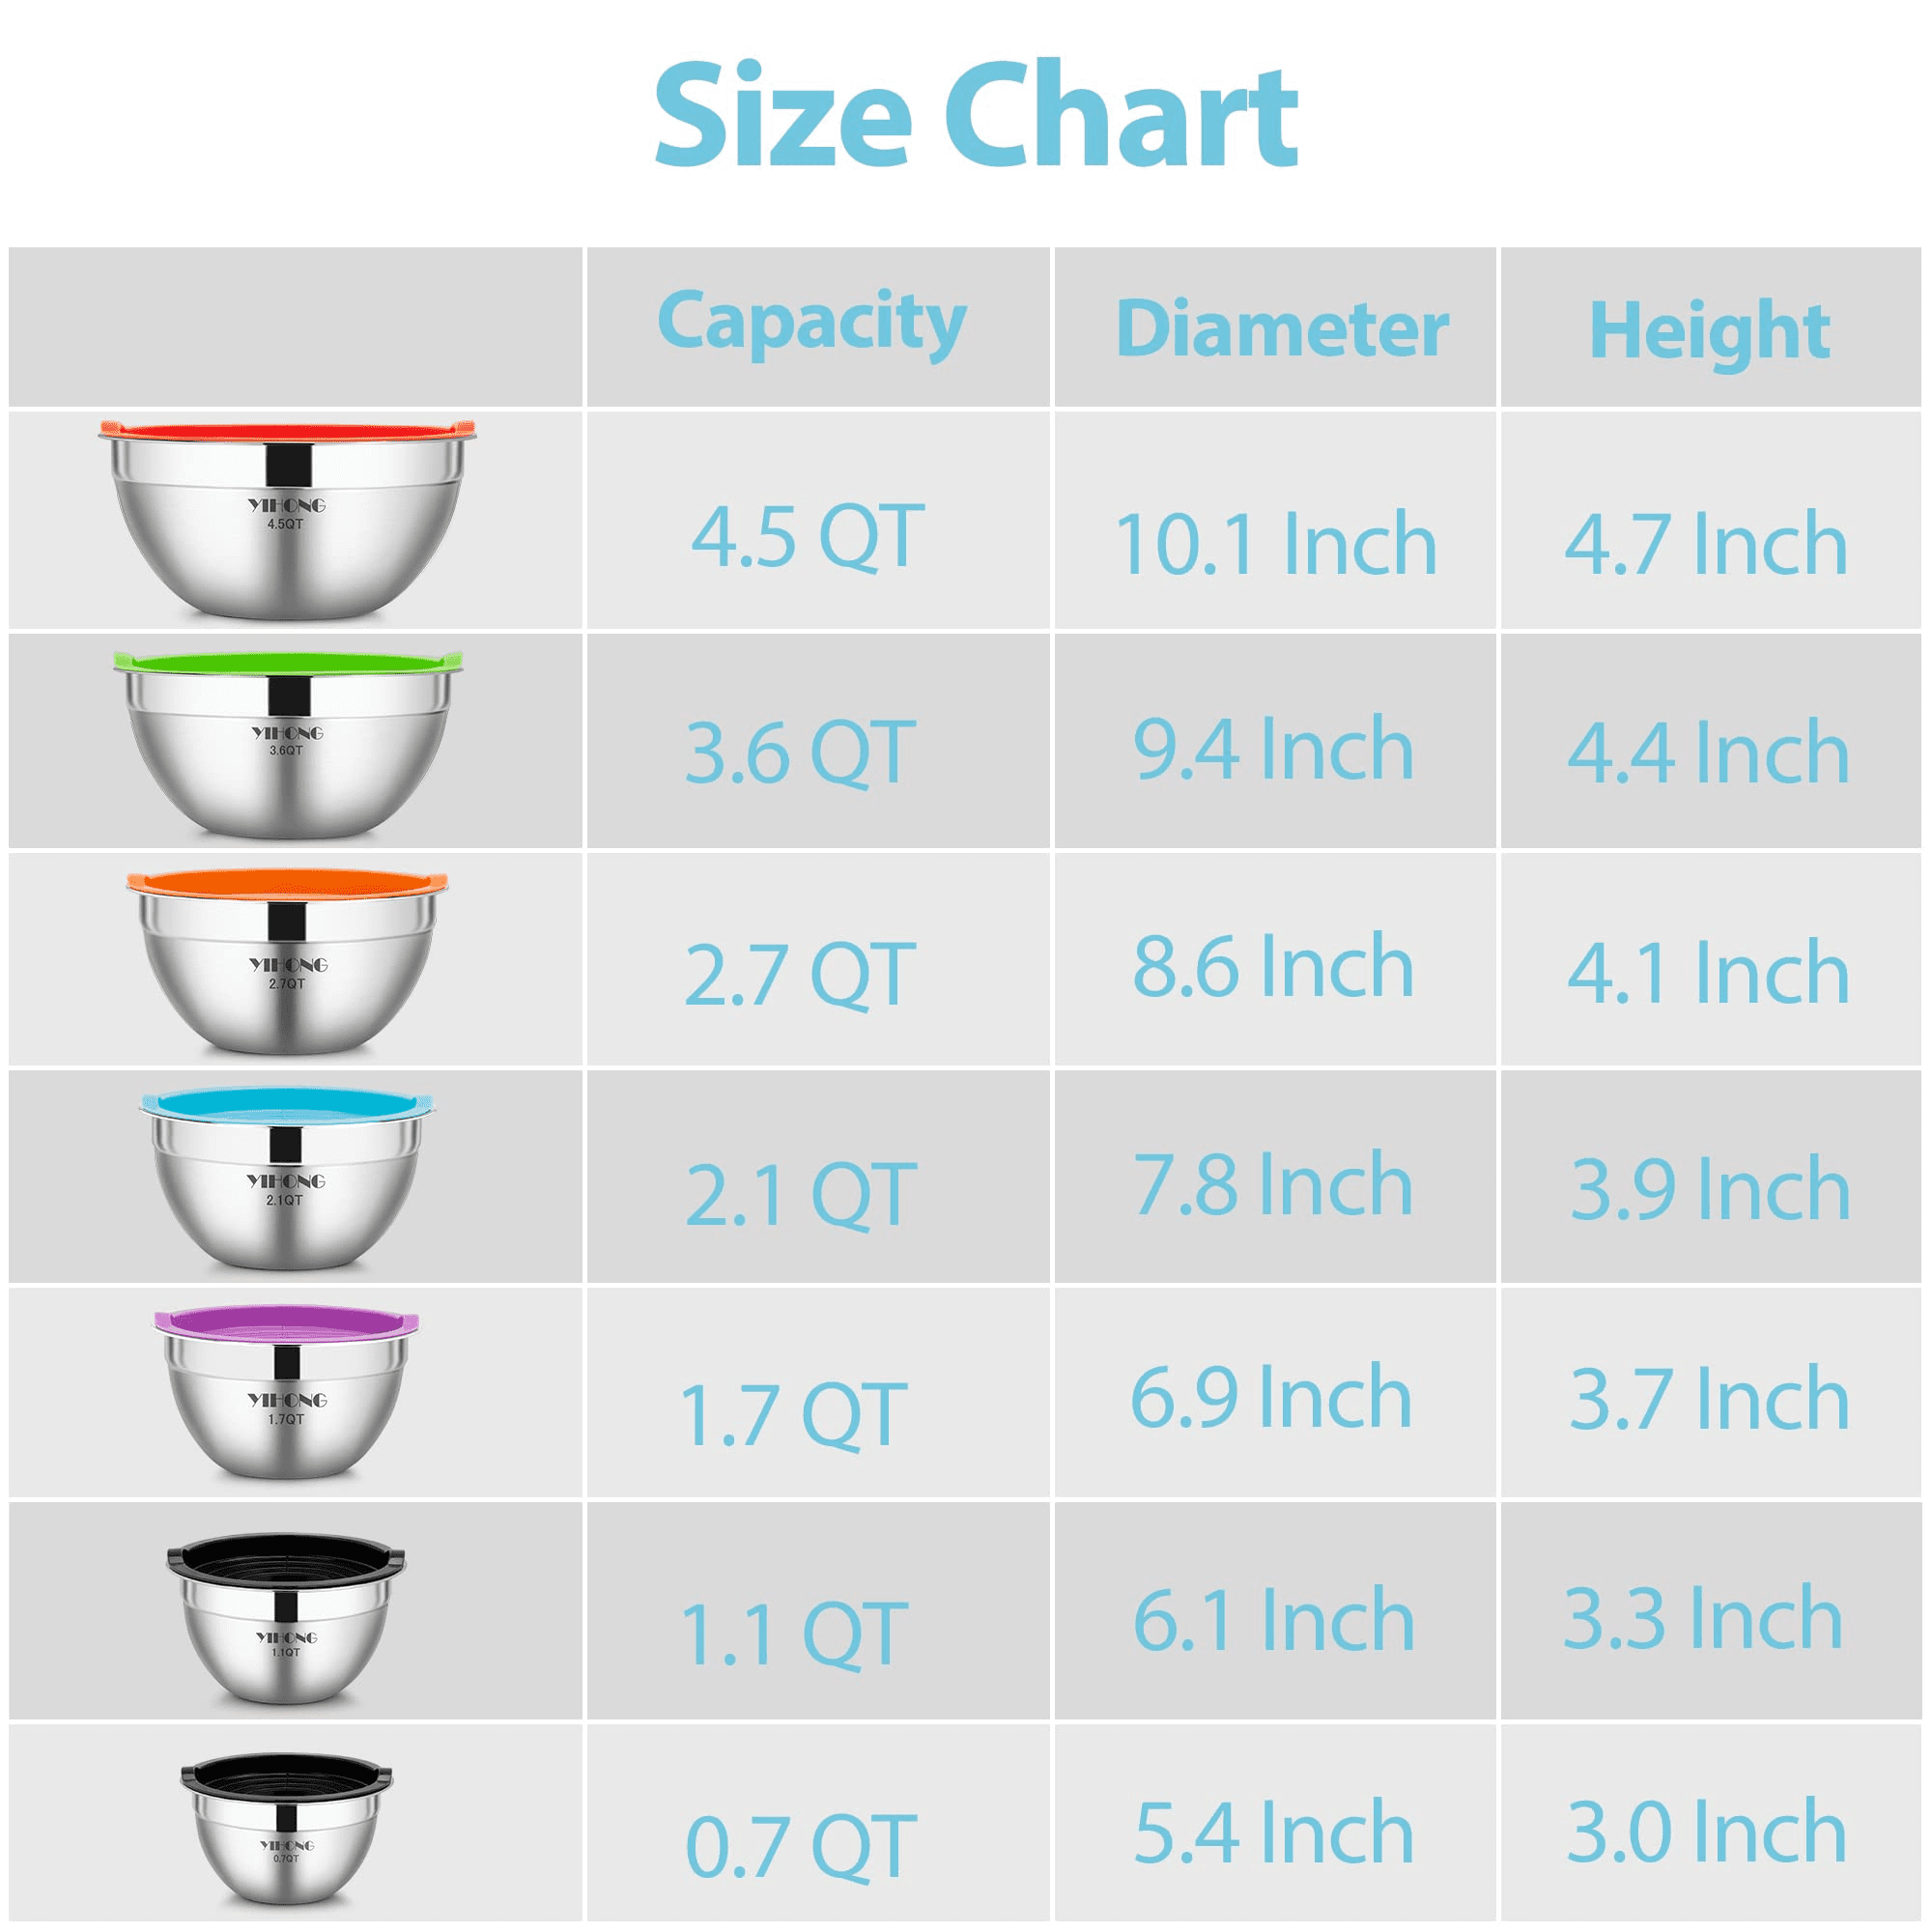 Oversized All-Purpose Stainless Steel Bowl for Home & Commercial, 16 Qt, 15  L, Made in Korea, Premium Stainless Steel, No Dulling & Rusting, For